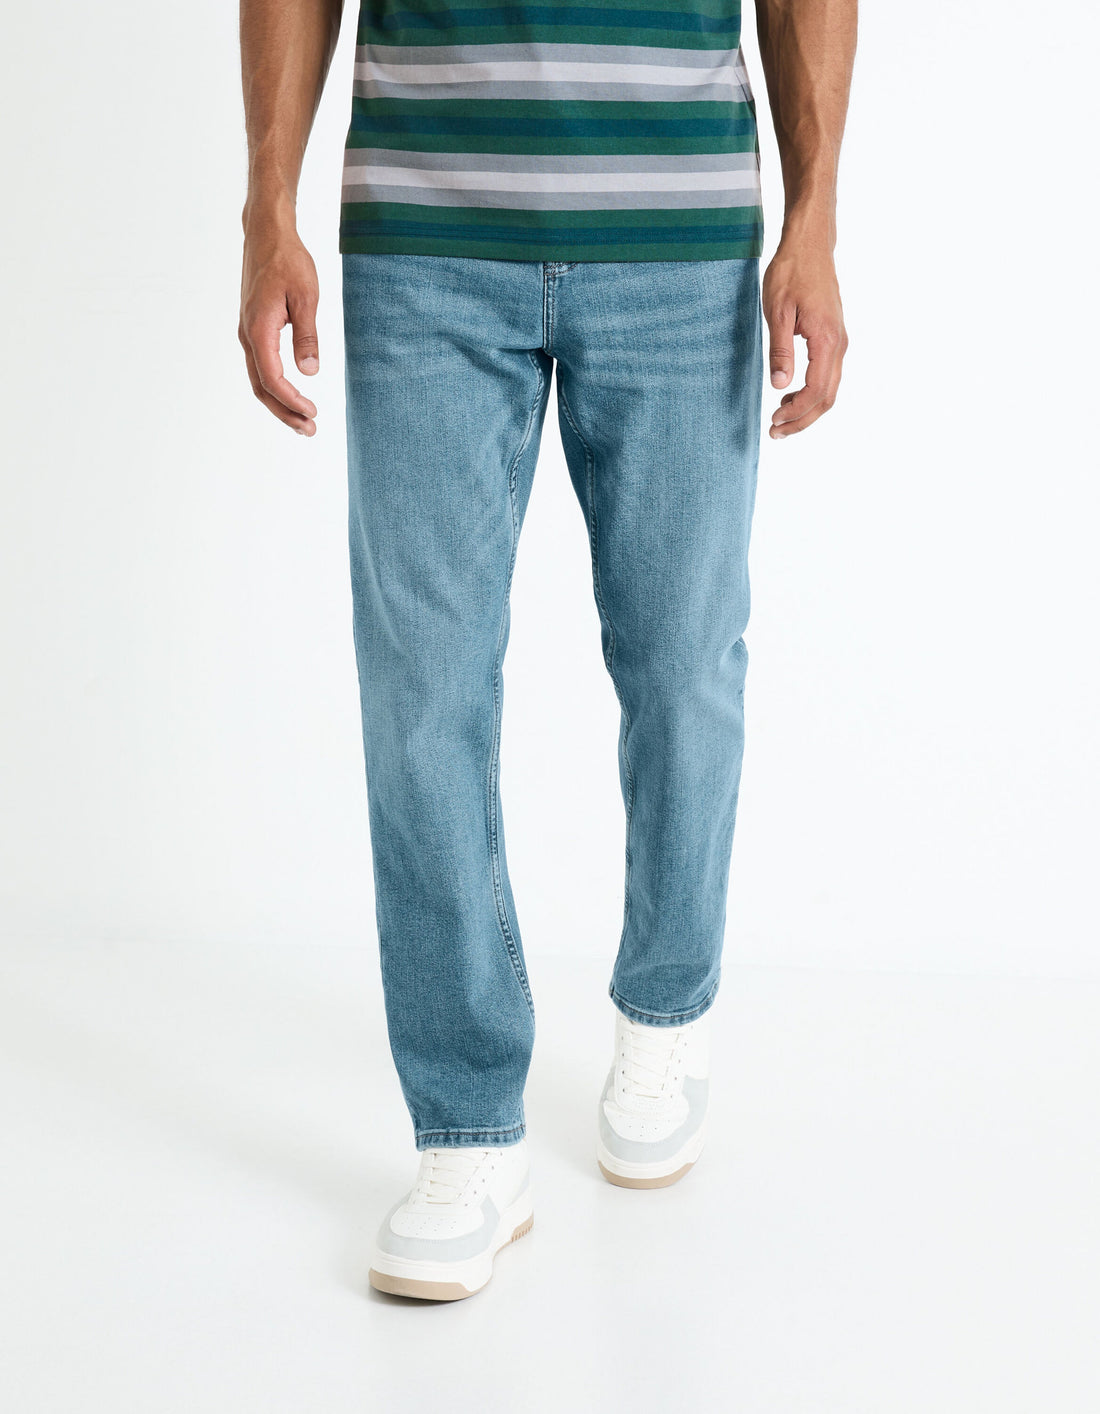 C15 Straight Jeans 3 Lengths Stretch - Double Stone_FOBASE15_DOUBLE STONE_01